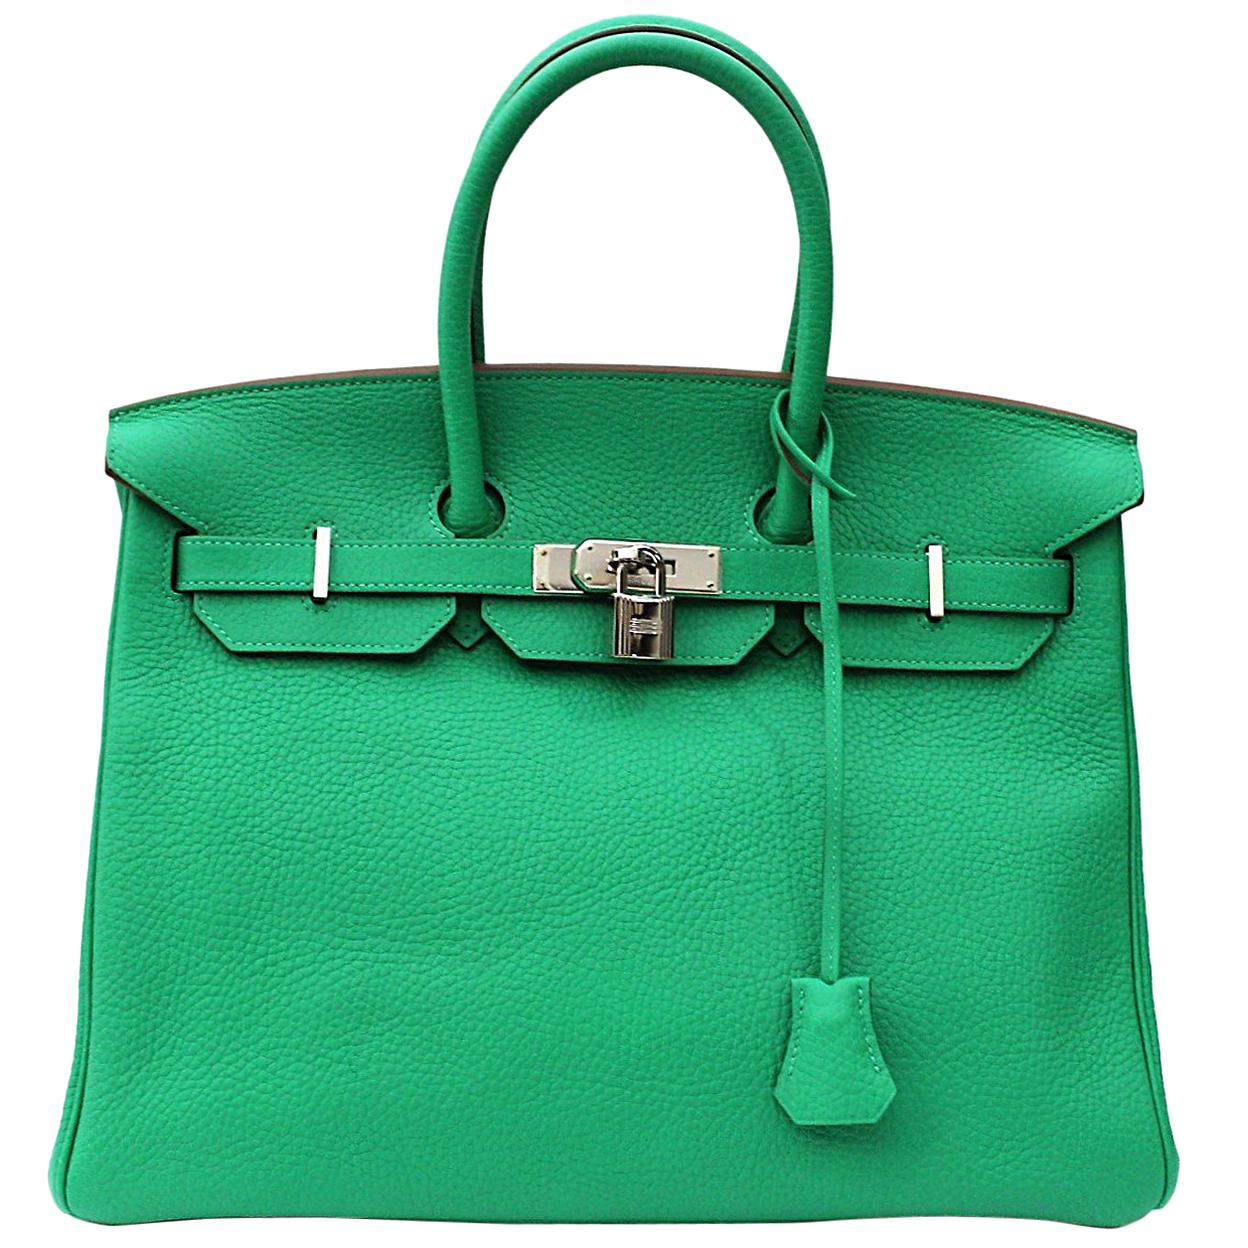 Hermes Mint Green Taurillon Clemence Leather Birkin 35 Bag at 1stDibs  hermes  birkin mint green, mint green birkin bag, mint green hermes bag